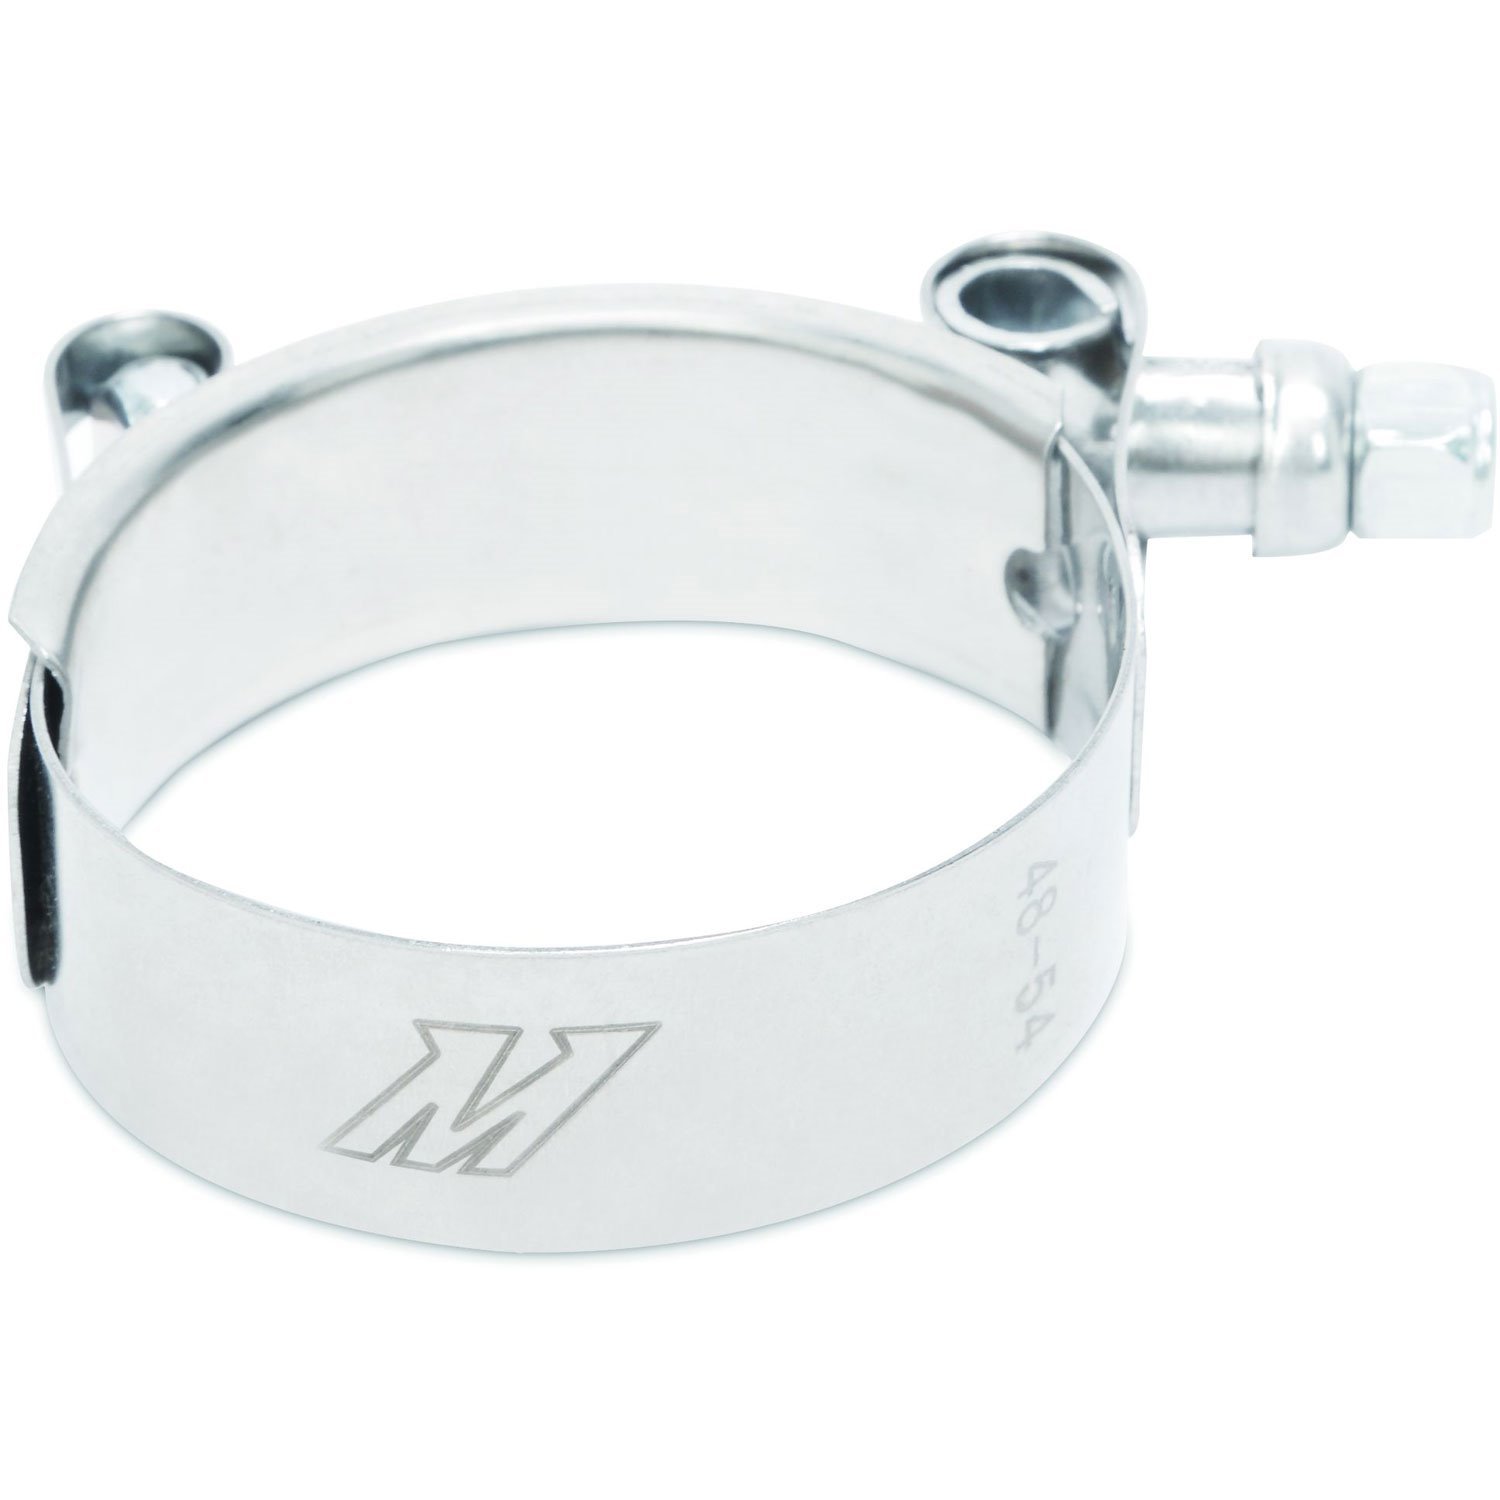 2.0" T-Bolt Hose Clamp 1.89" (48mm) to 2.12" (54mm) Clamping Range